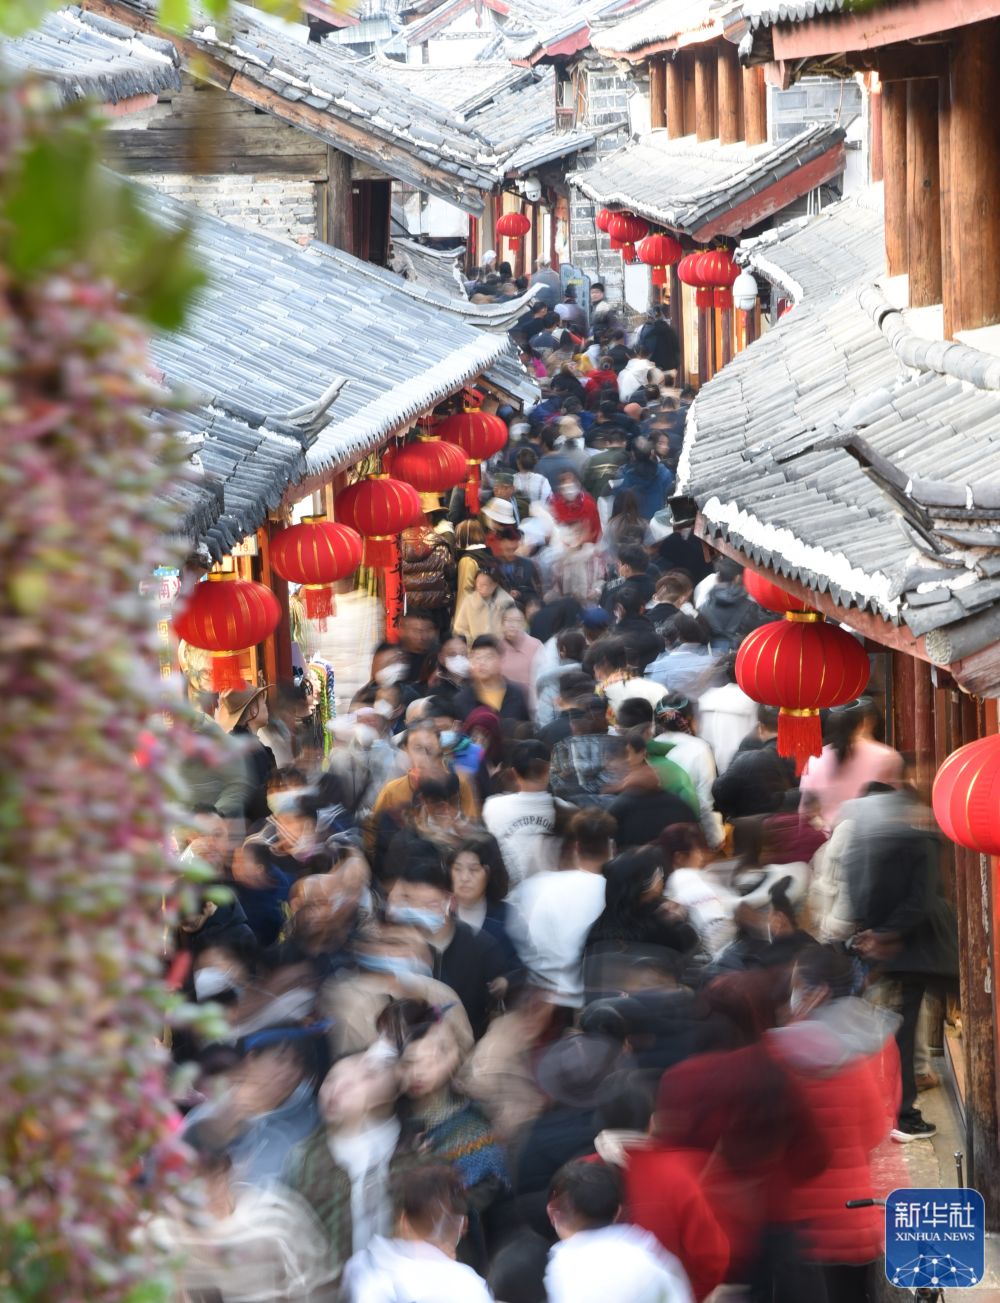 The Chinese New Year in the lens - the year is rich and consumption is booming